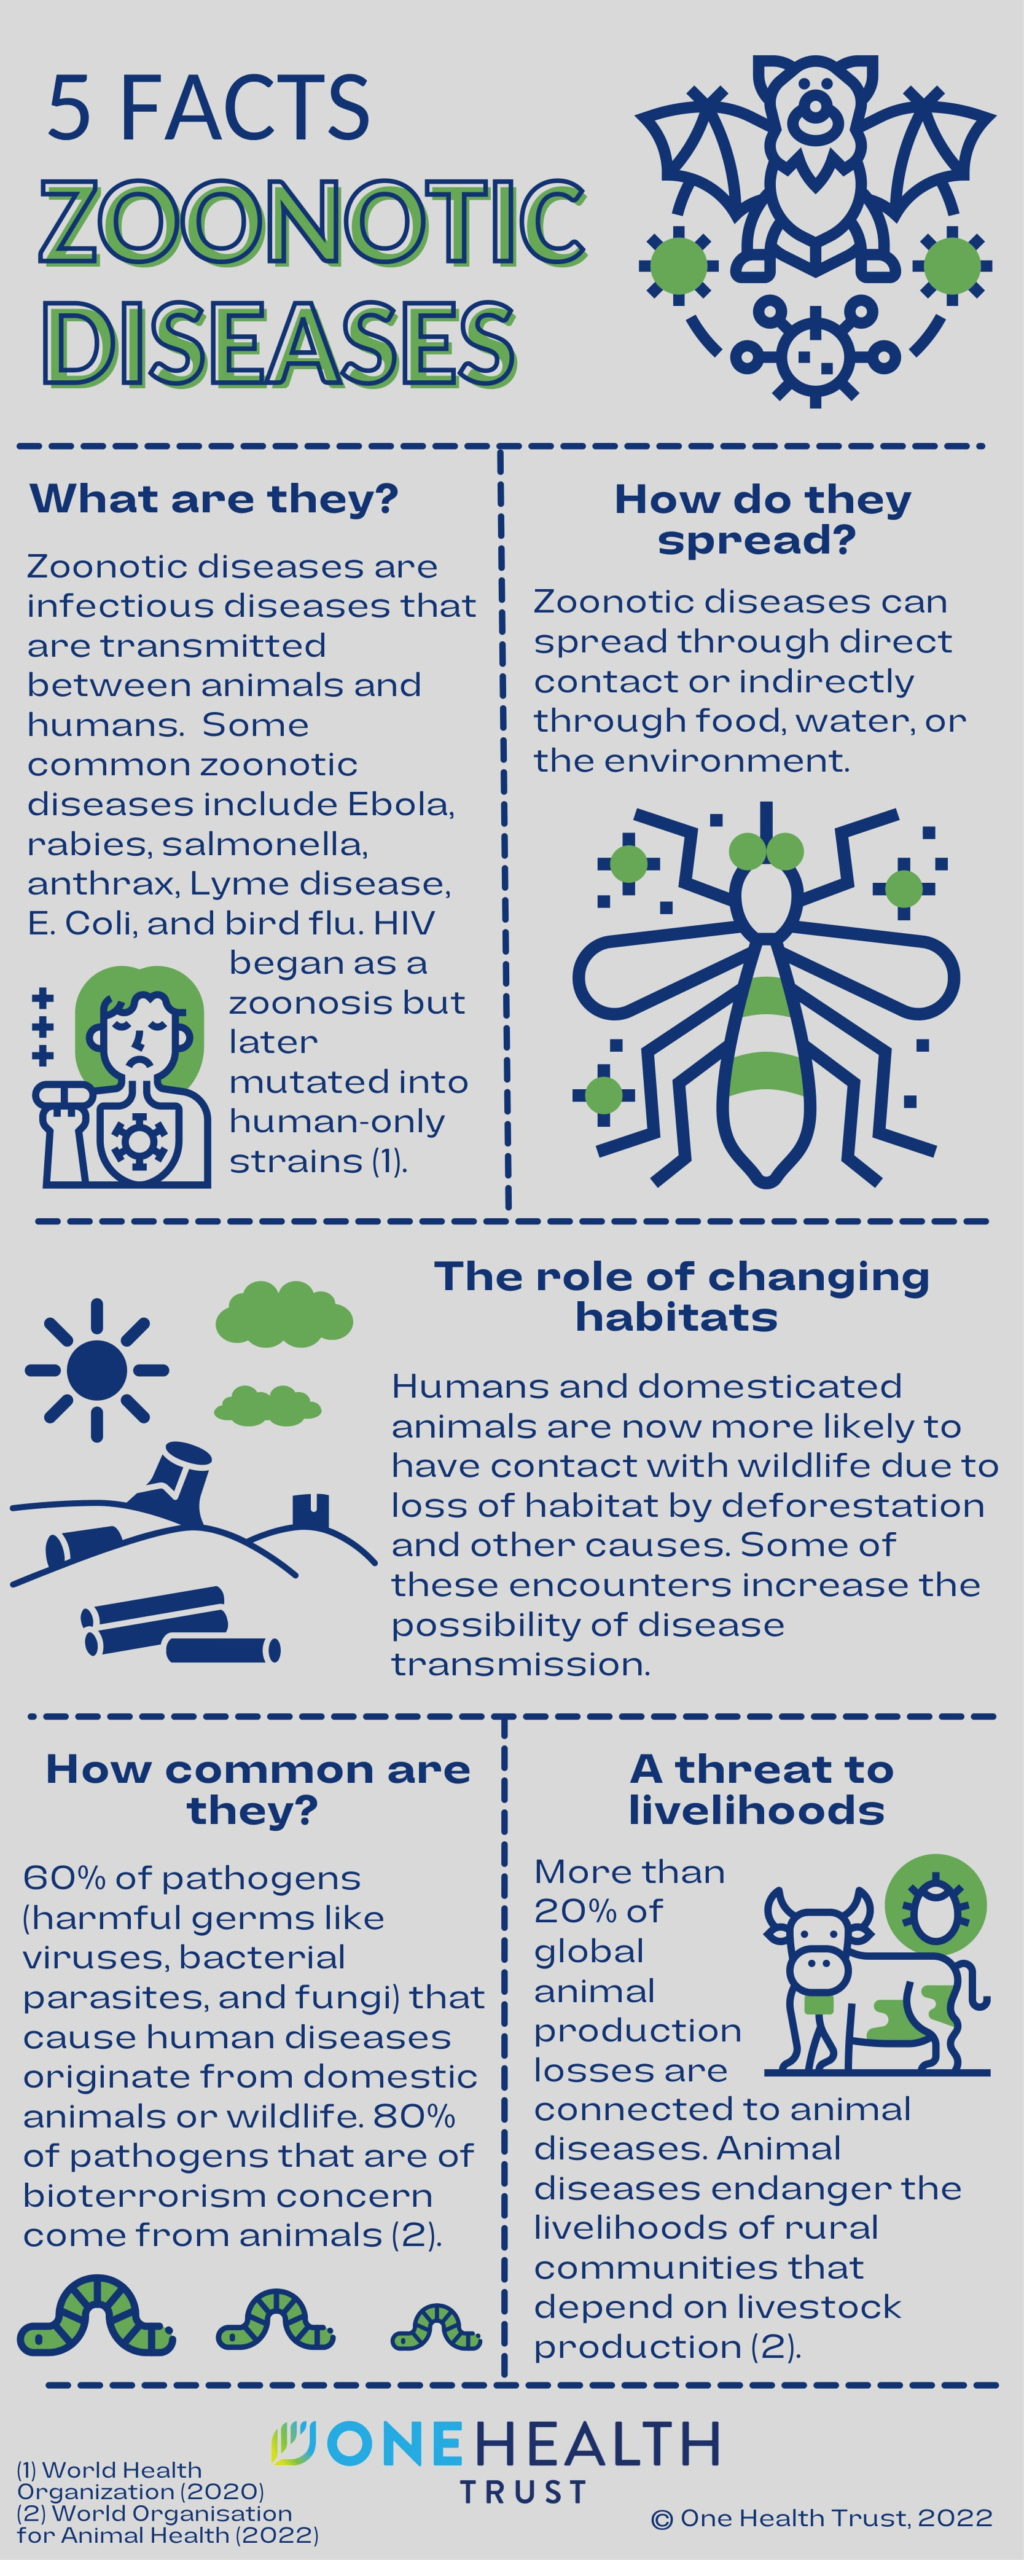 5 Facts - Zoonotic Diseases - One Health Trust